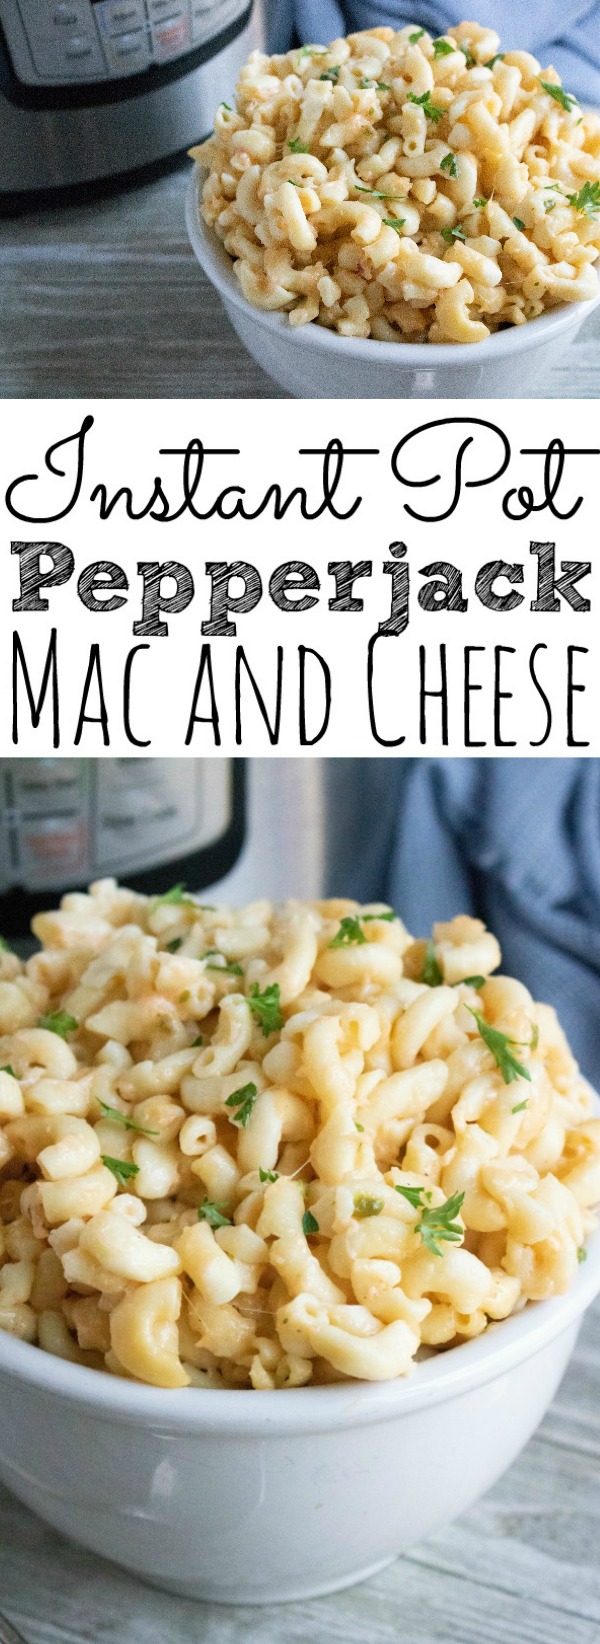 Instant Pot Pepperjack Mac and Cheese Family Recipe - simplytodaylife.com